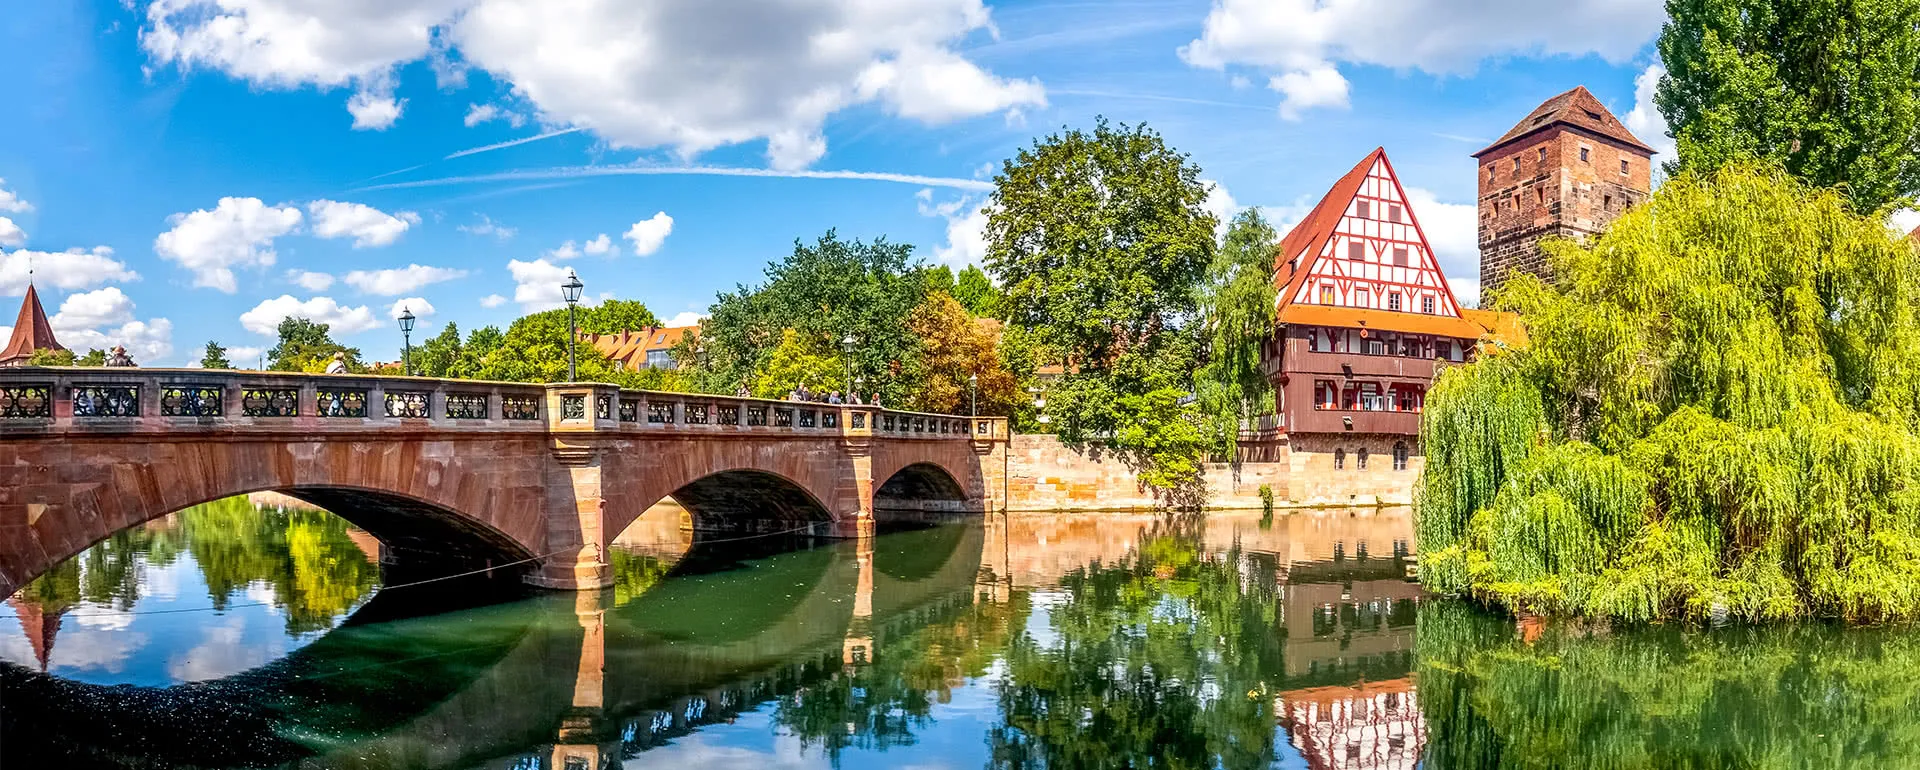 Meeting and conference location Nuremberg